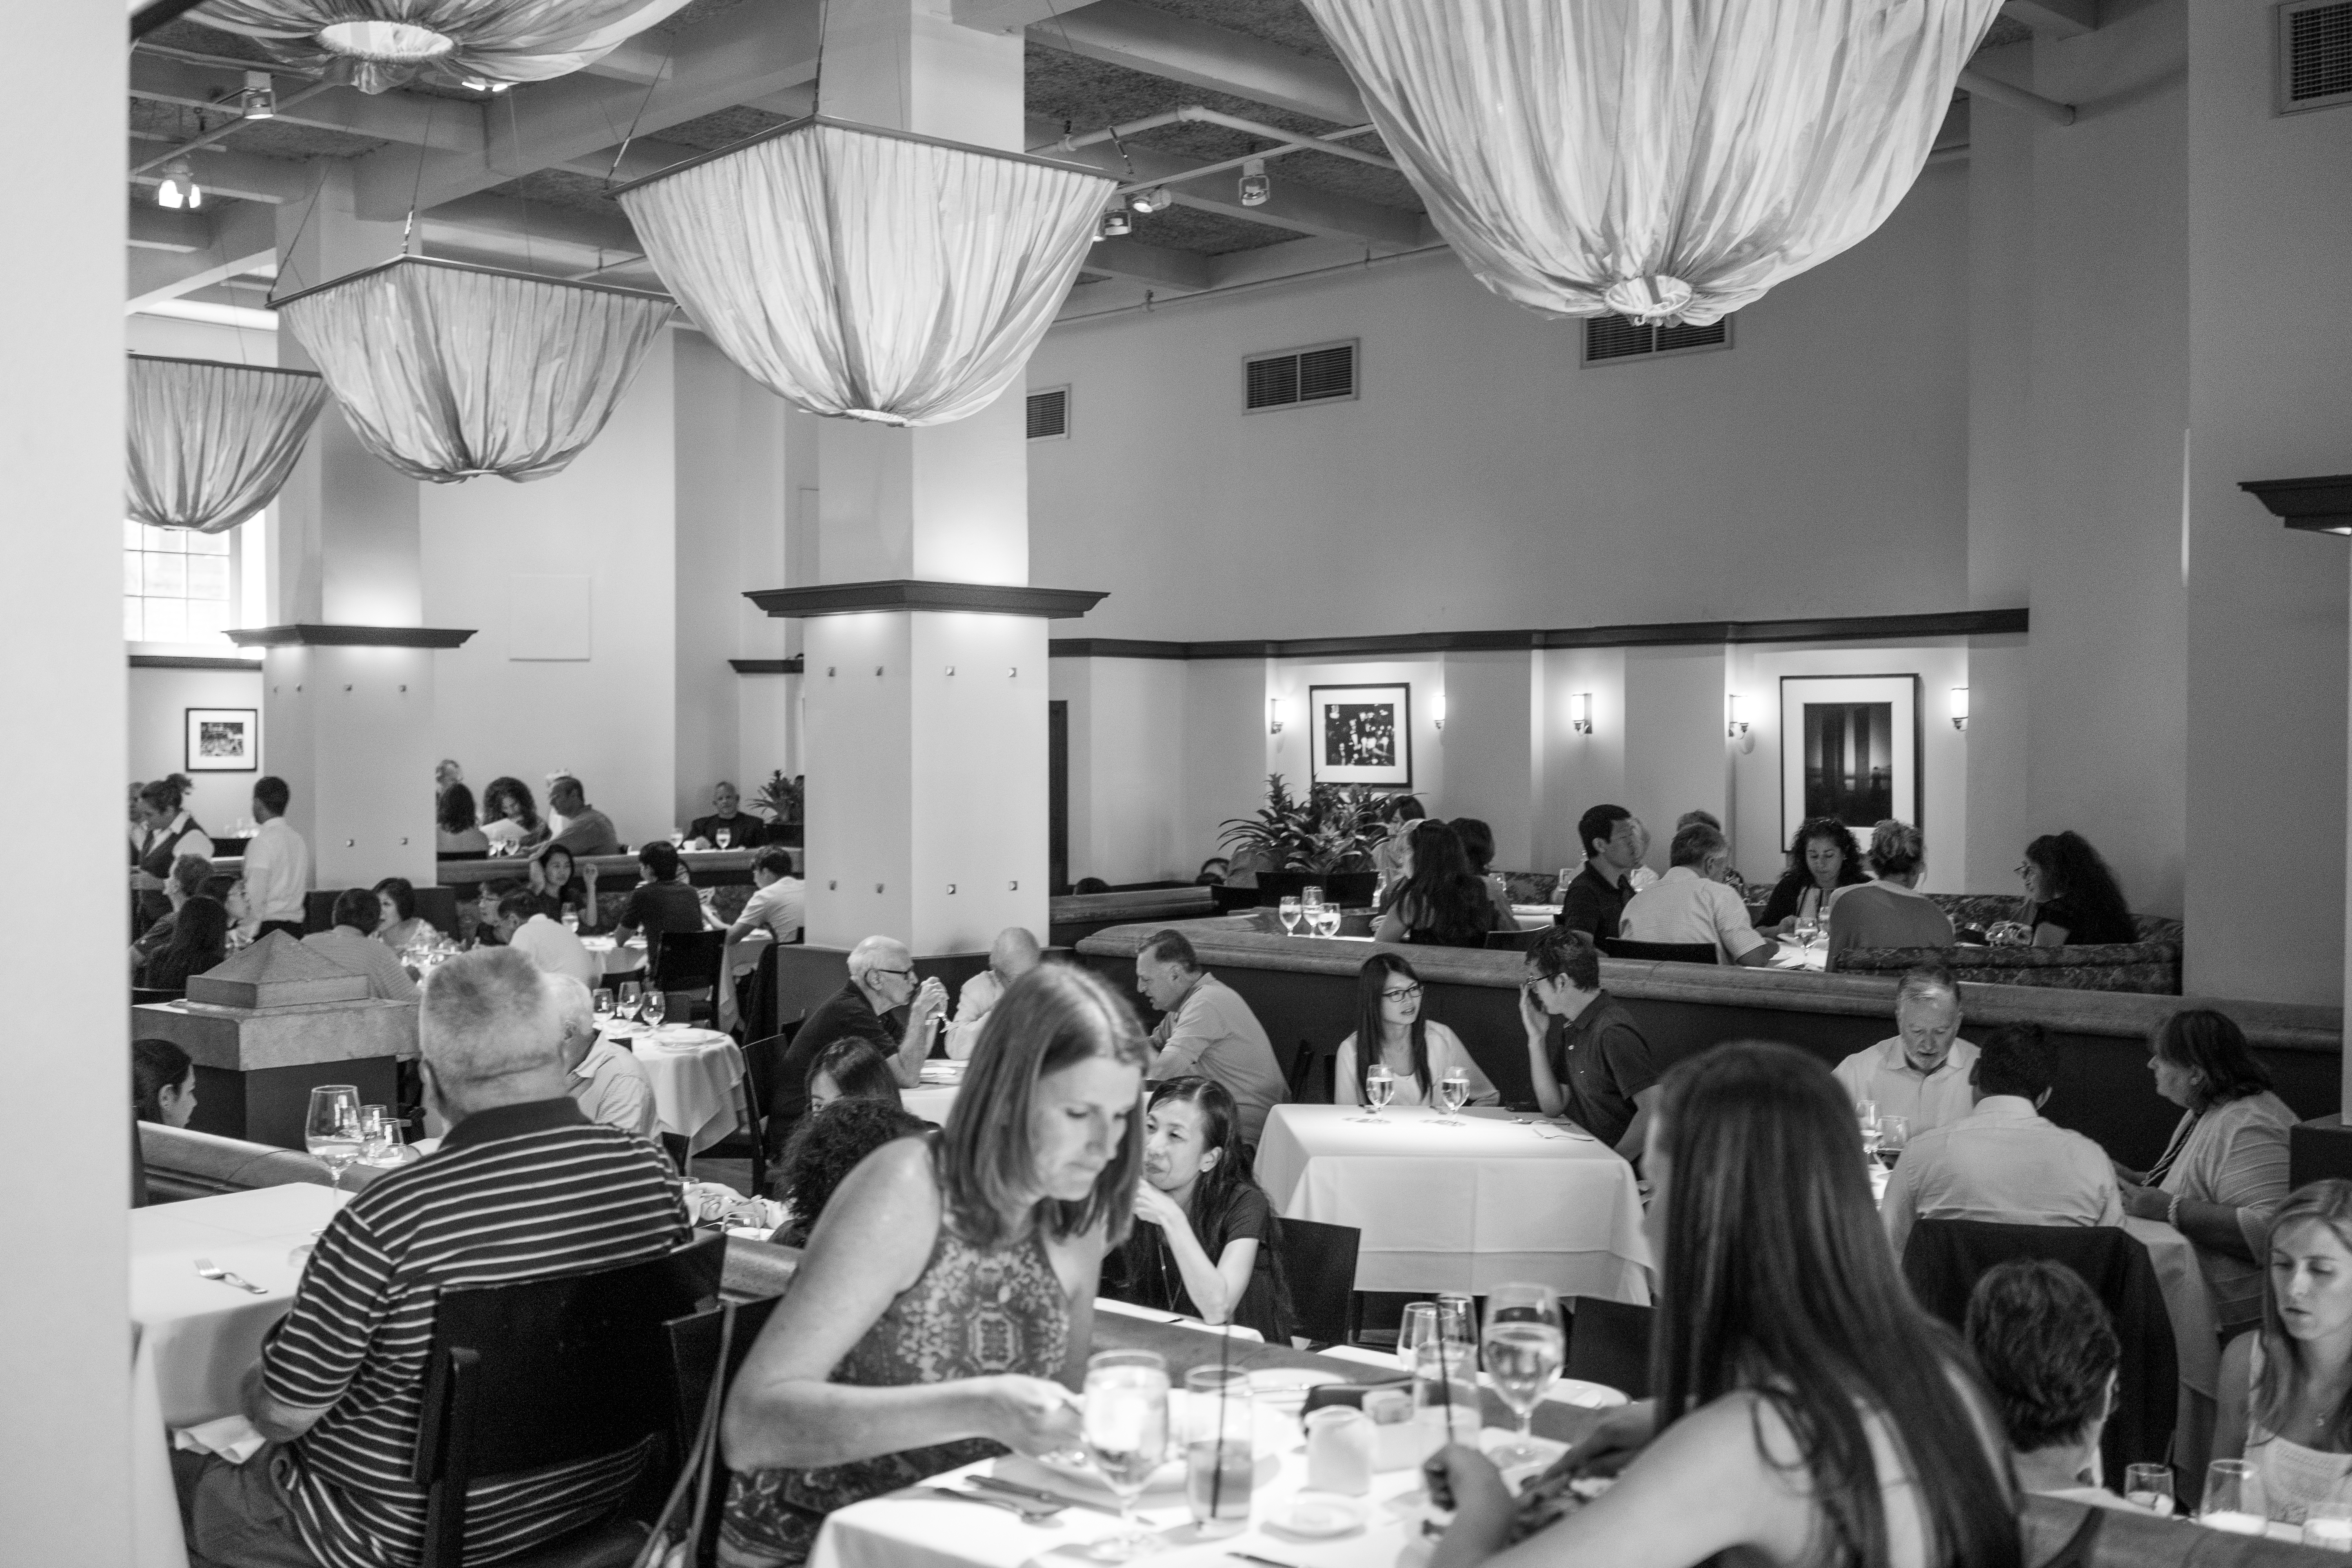 Gotham Bar &amp; Grill’s dining room in black and white